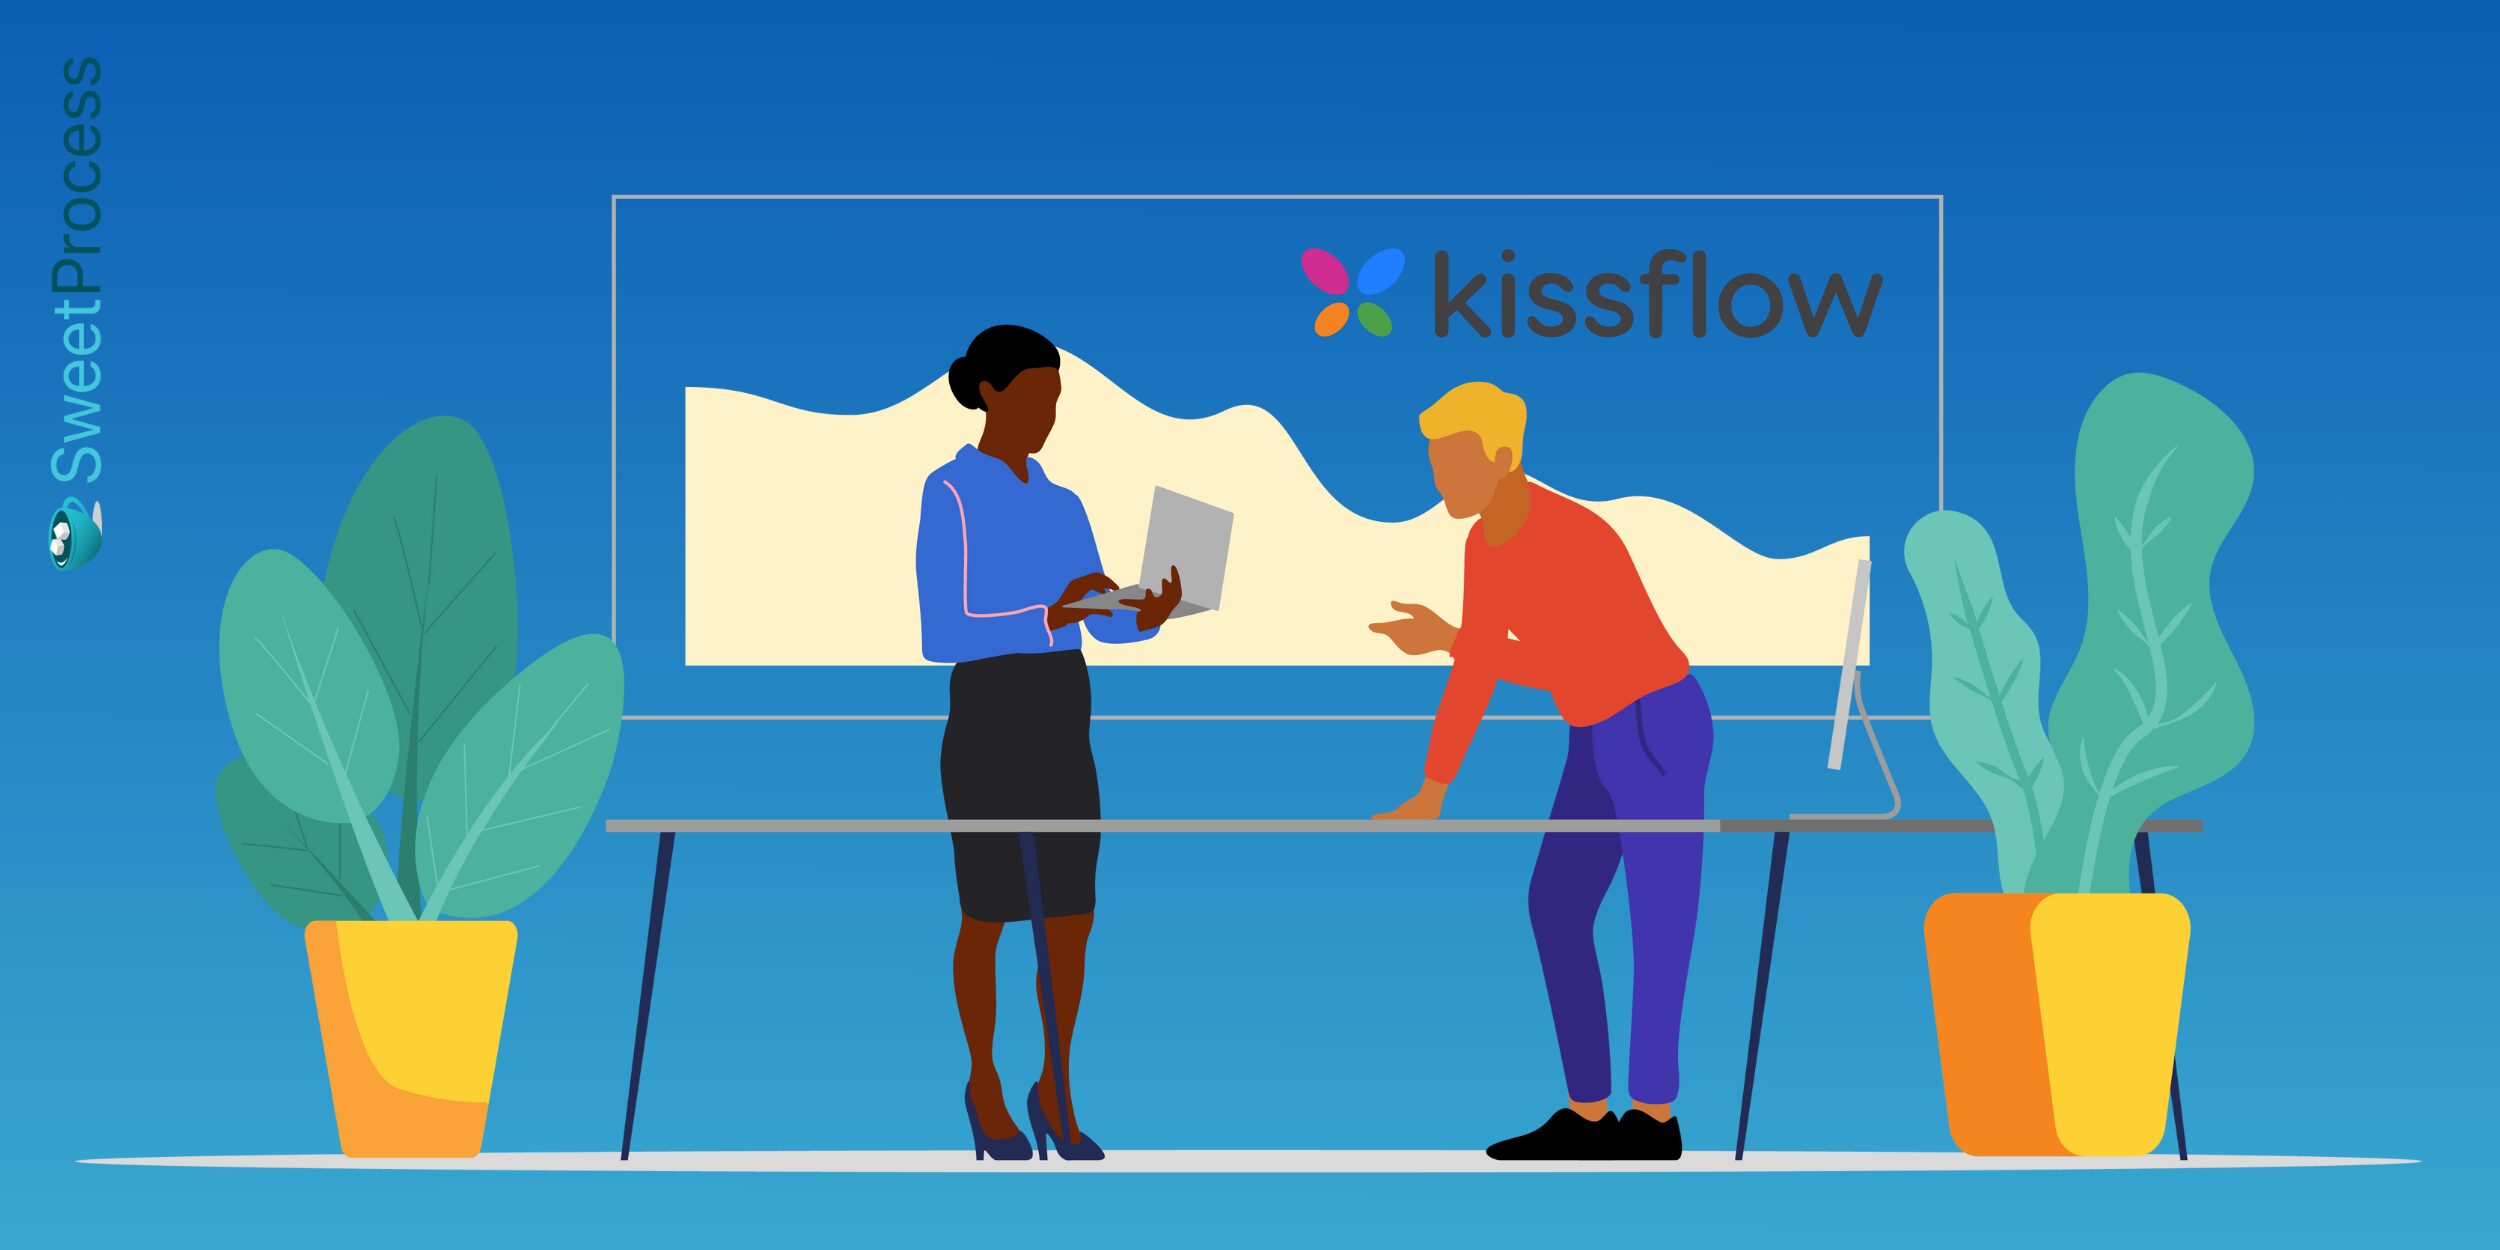 Who Is Kissflow For?